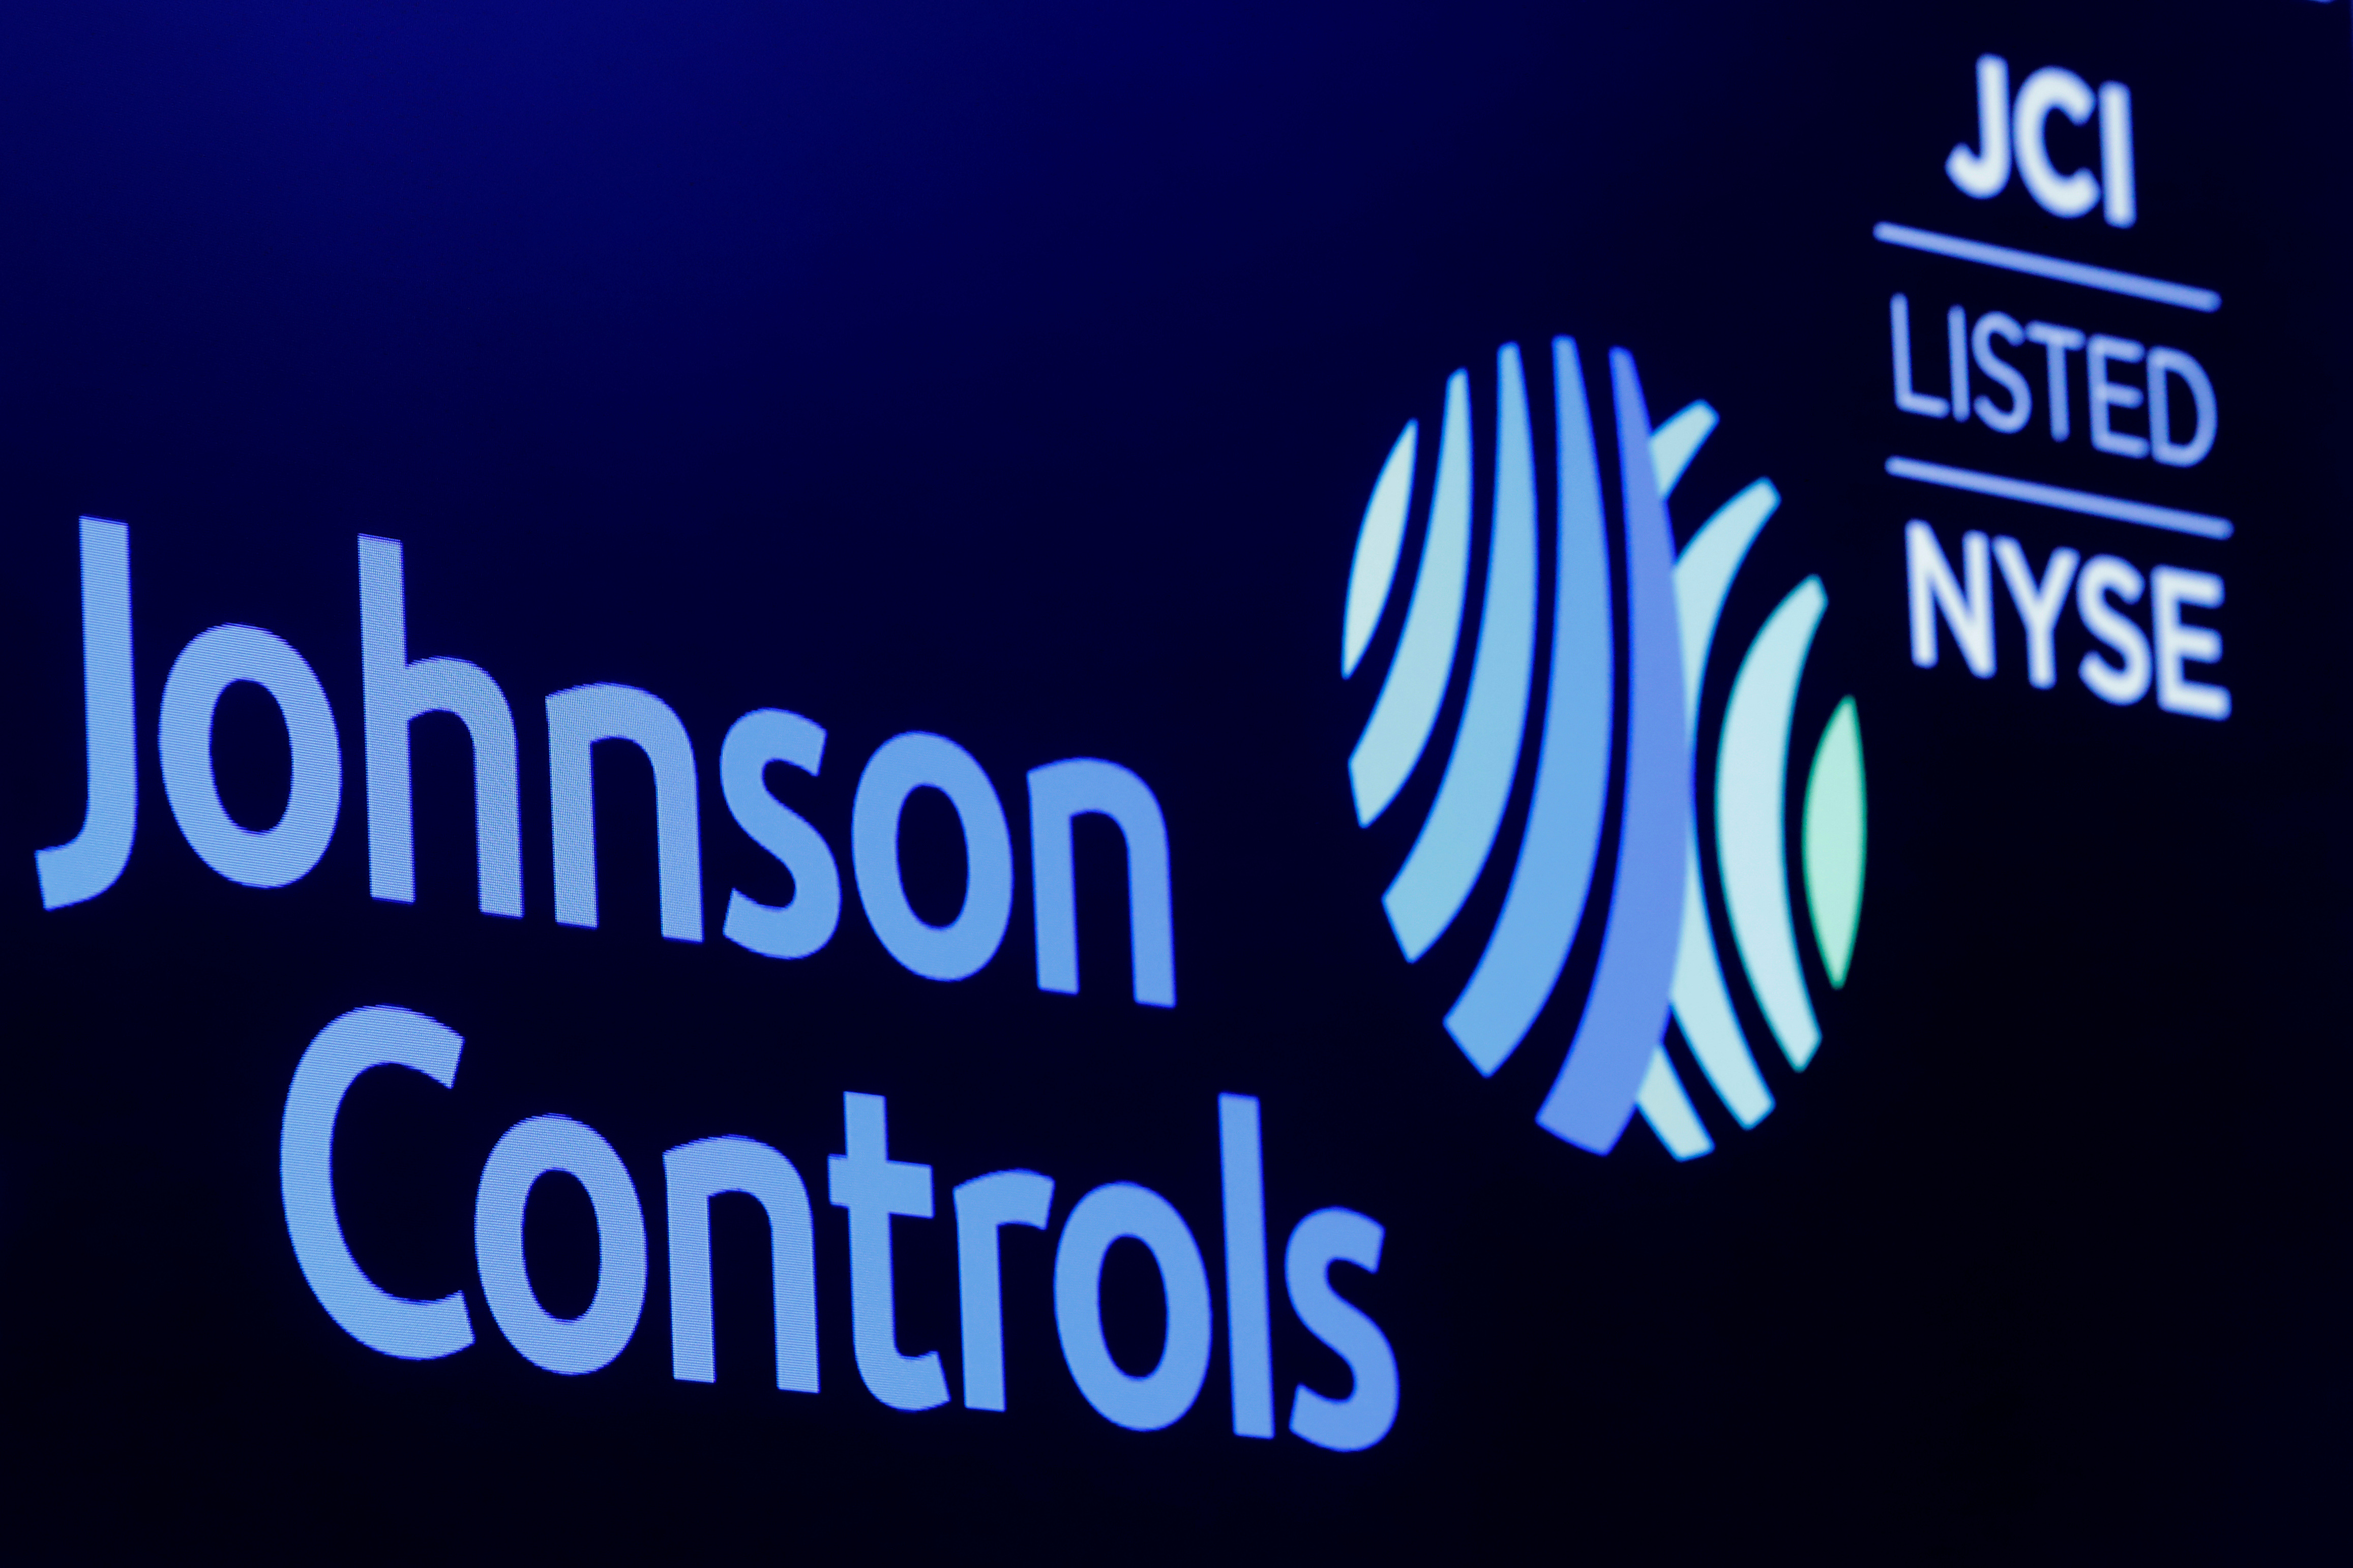 The logo and trading symbol for Johnson Controls International is displayed on a board on the floor of the NYSE in New York